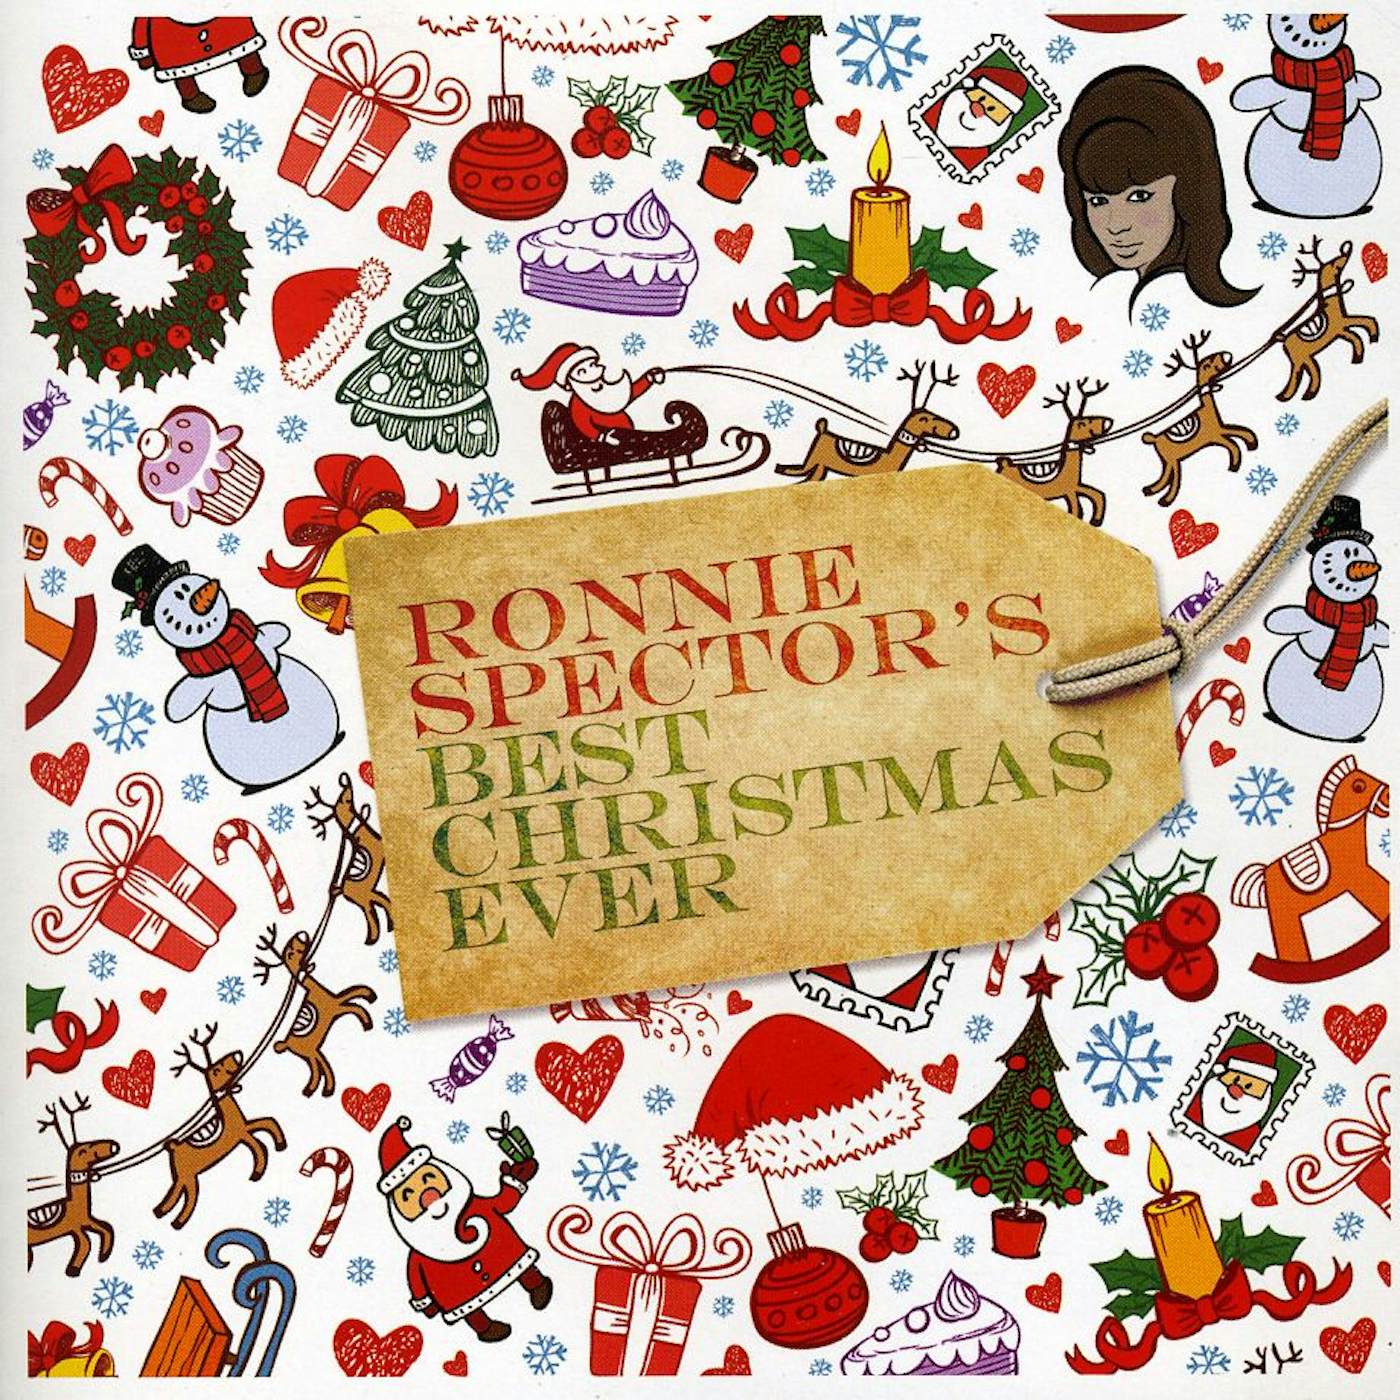 RONNIE SPECTOR'S BEST CHRISTMAS EVER CD